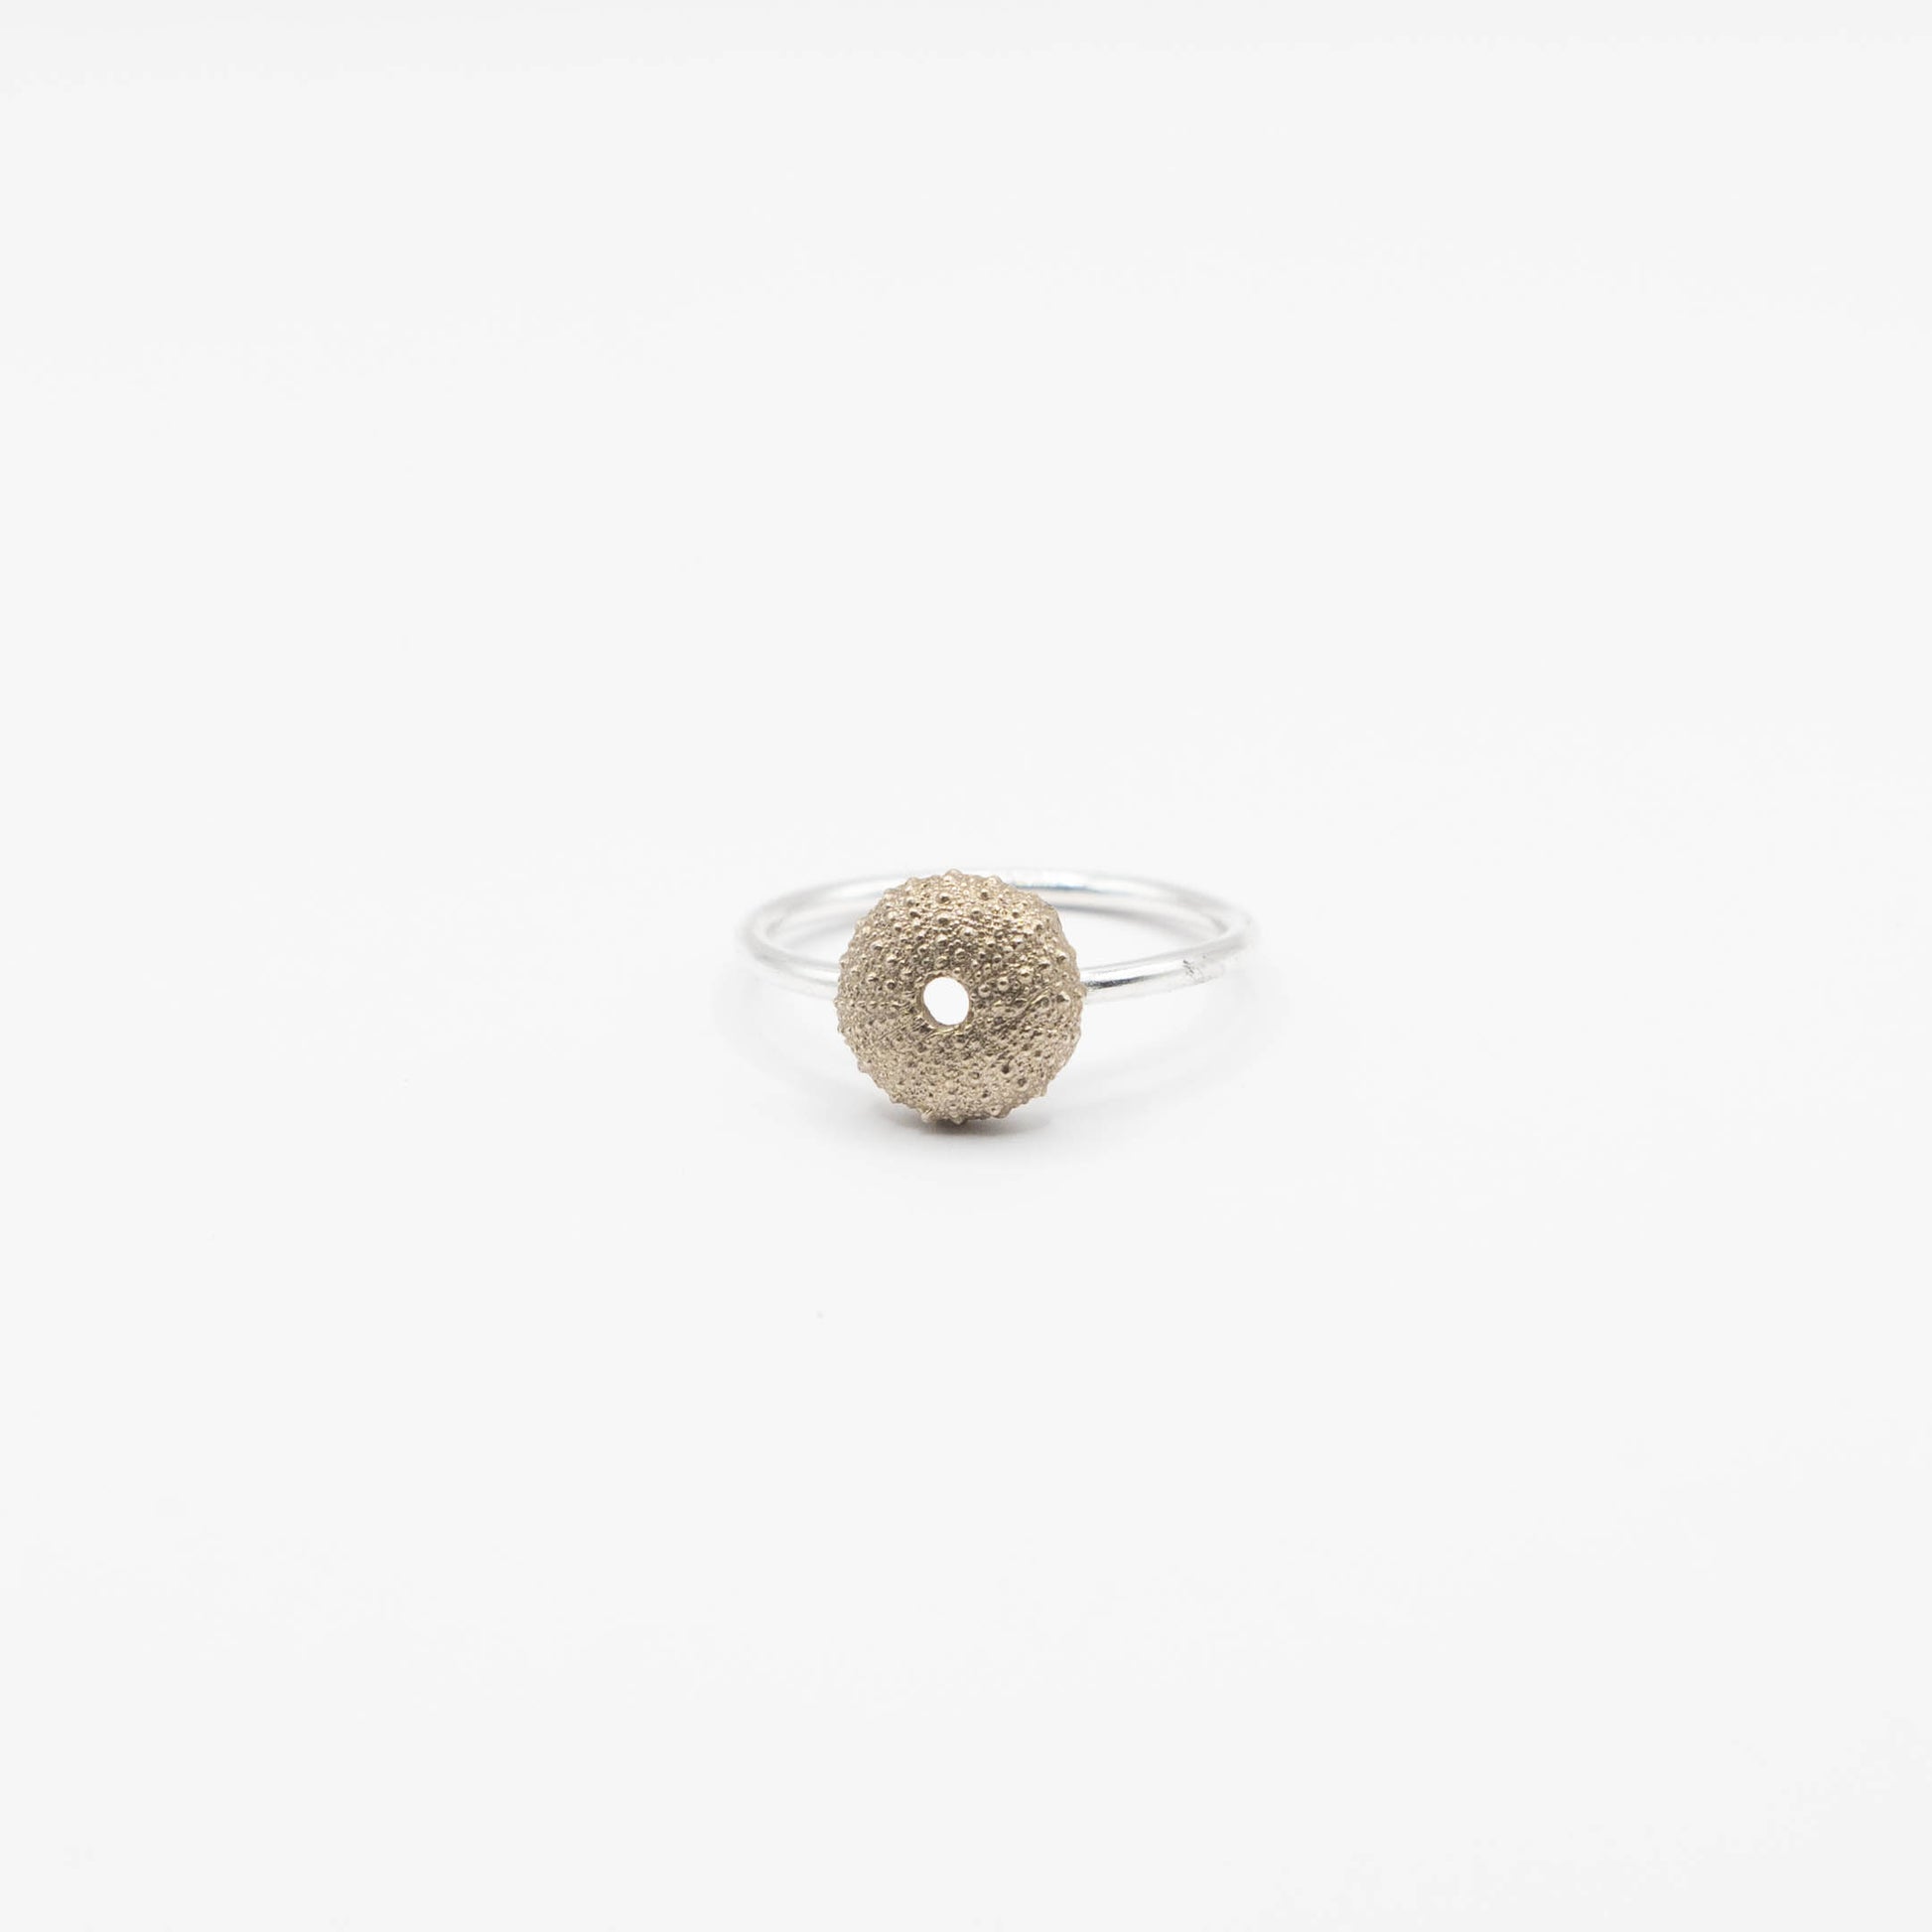 brass and silver ring, sea urchin